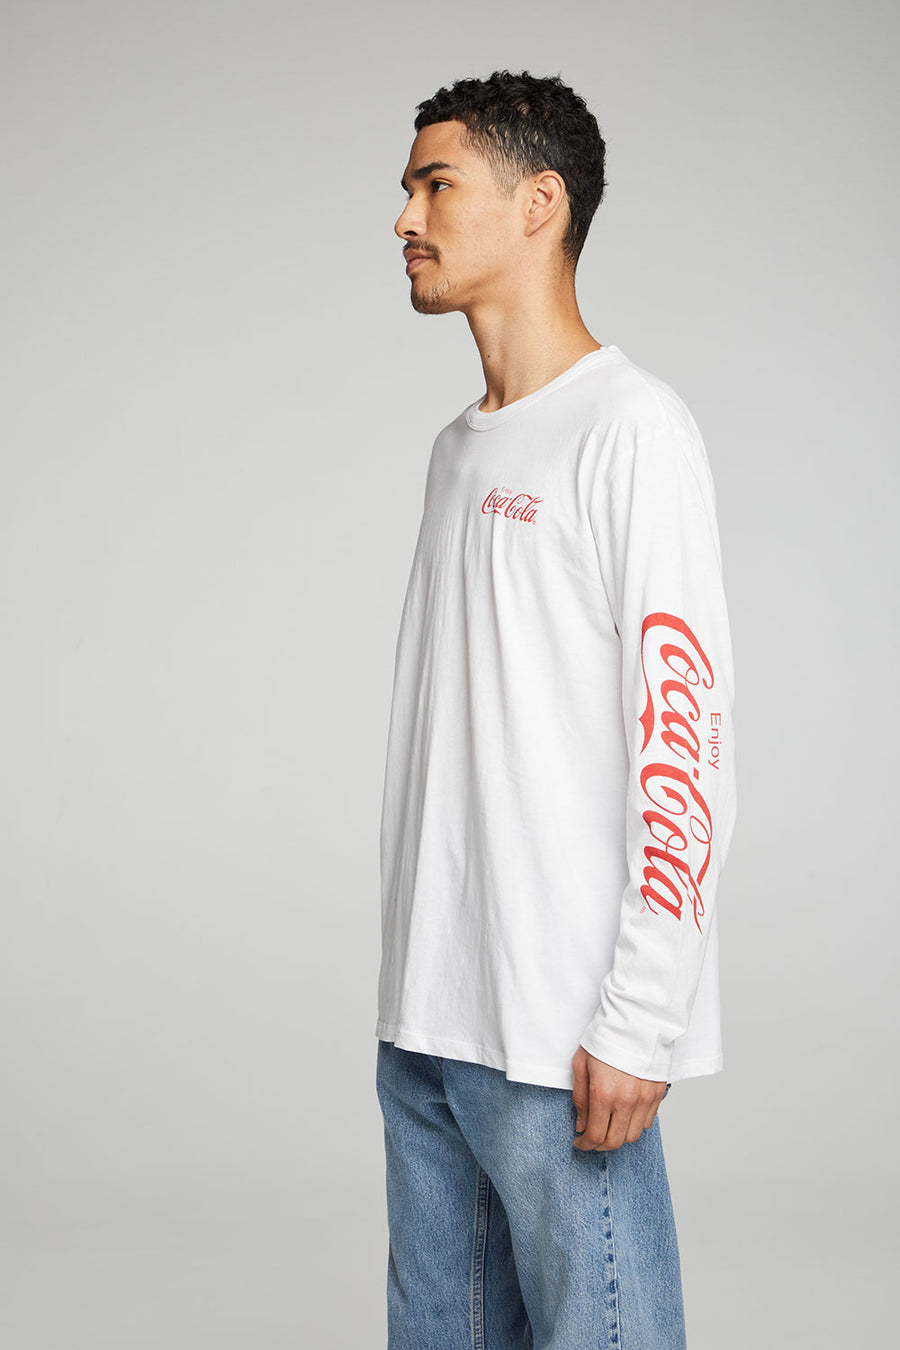 Coca Cola - Classic Logo MENS chaserbrand